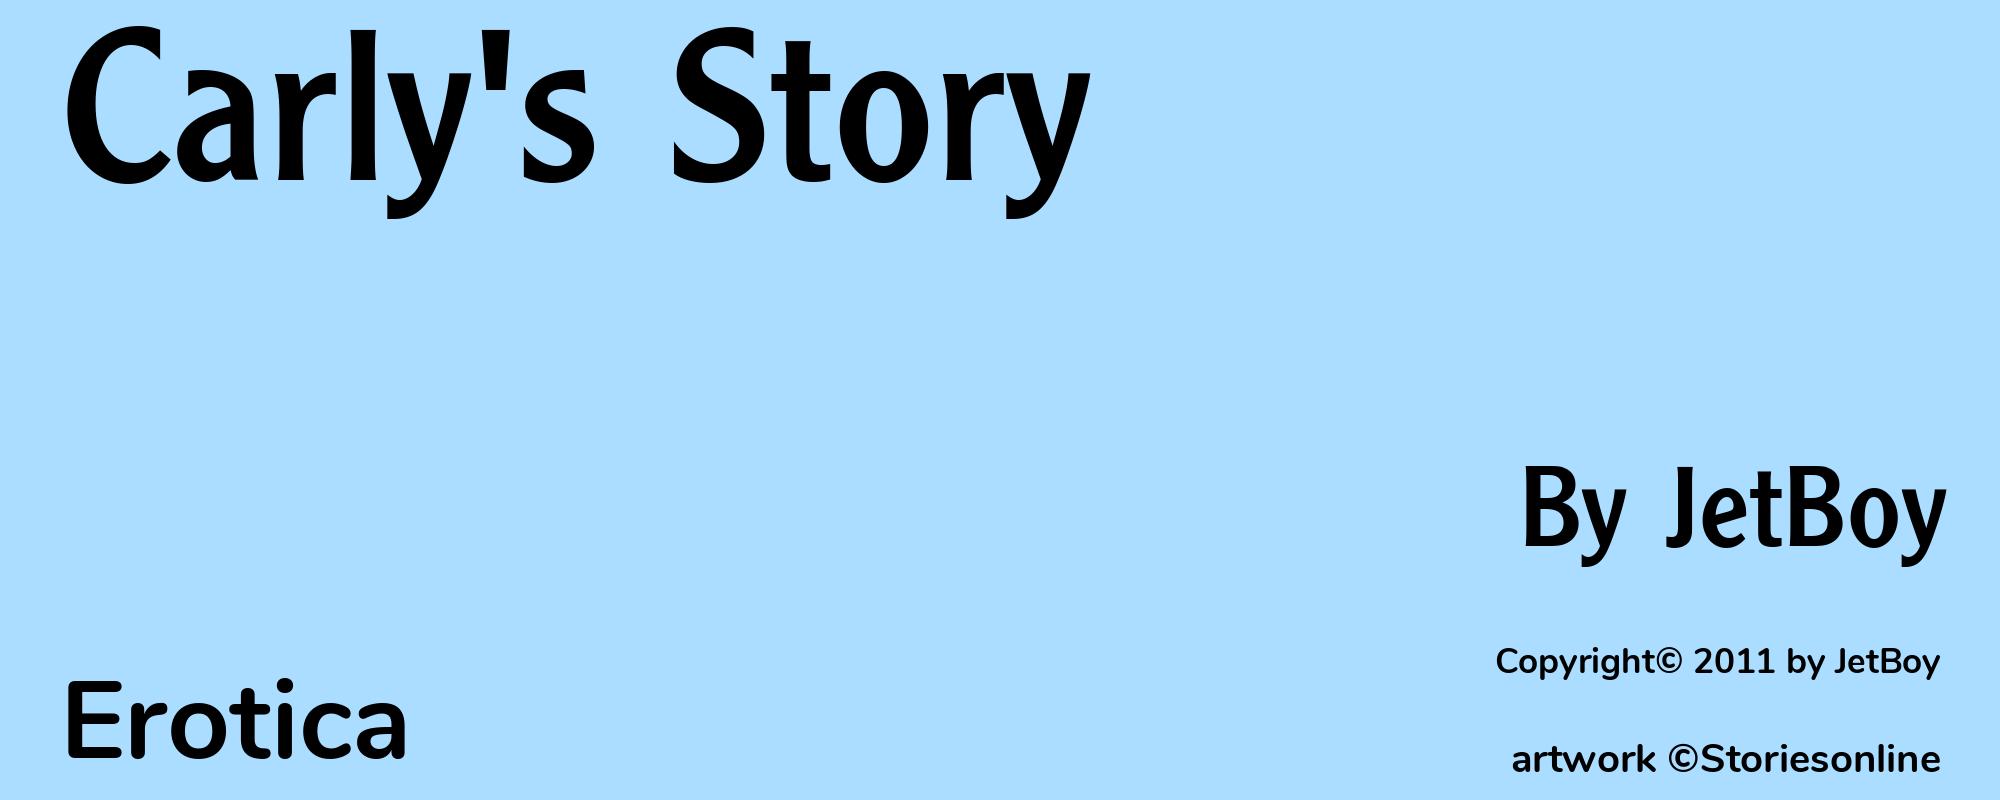 Carly's Story - Cover